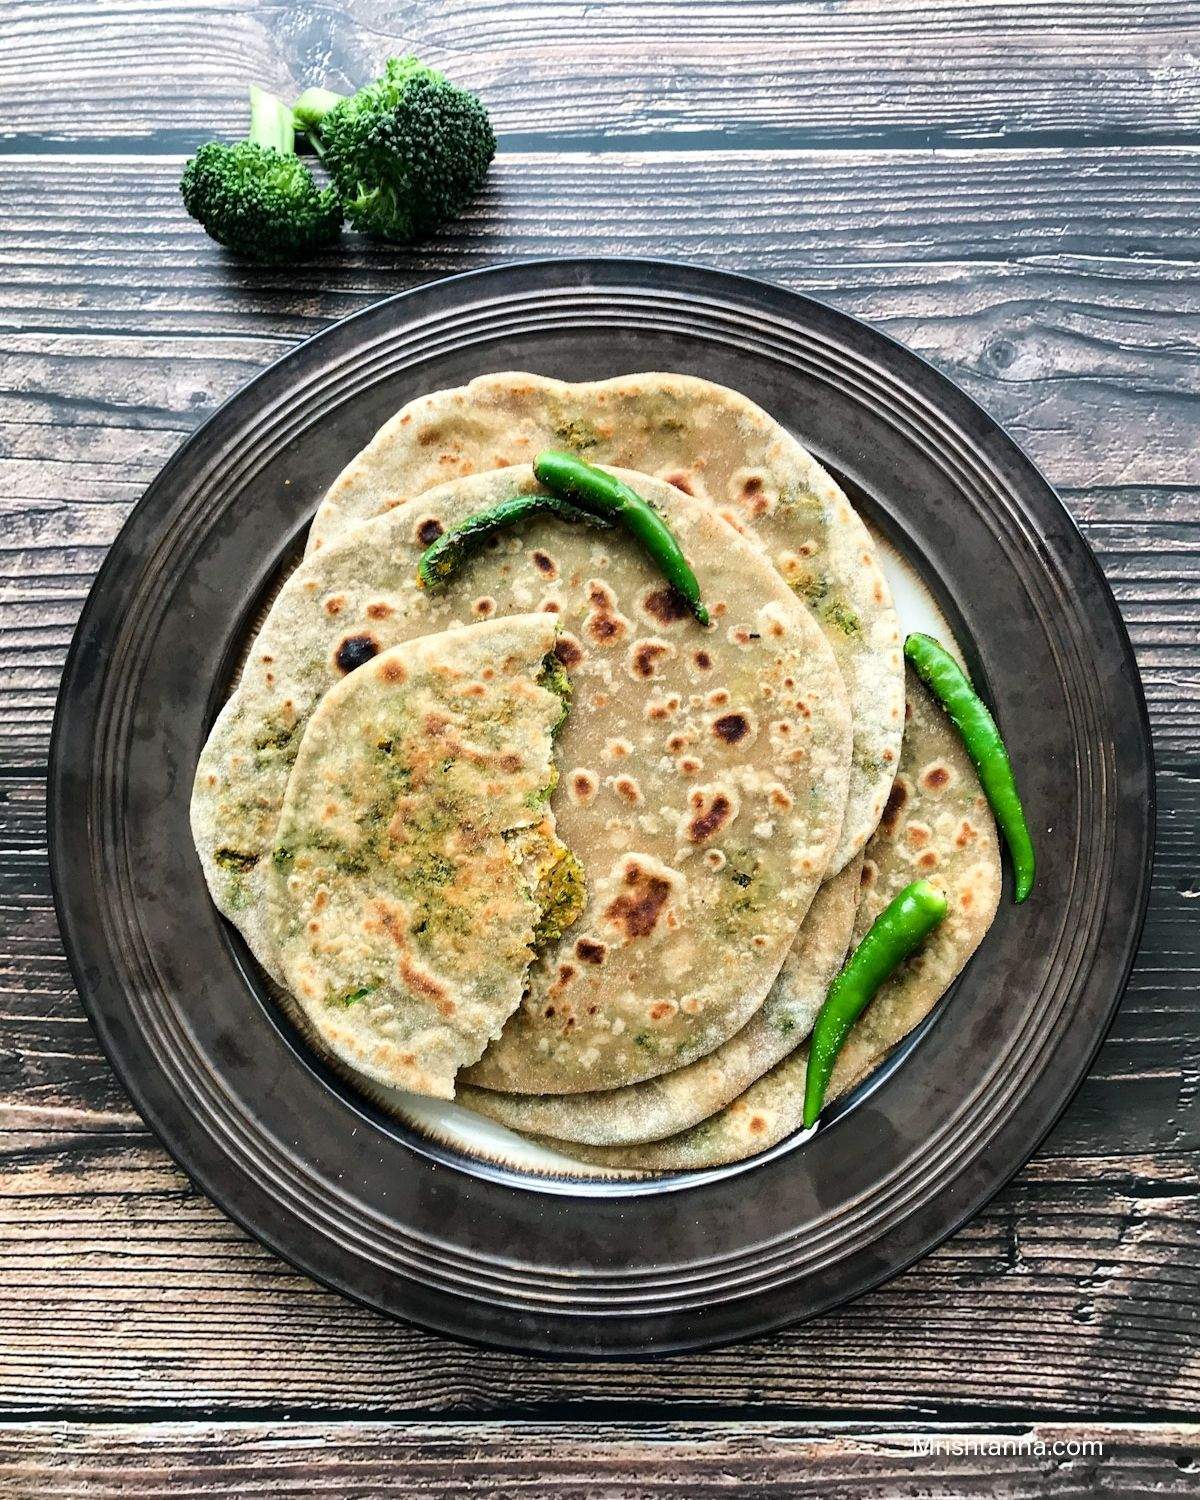 A plate of broccoli paratha and toasted chilies are on the wooden surface